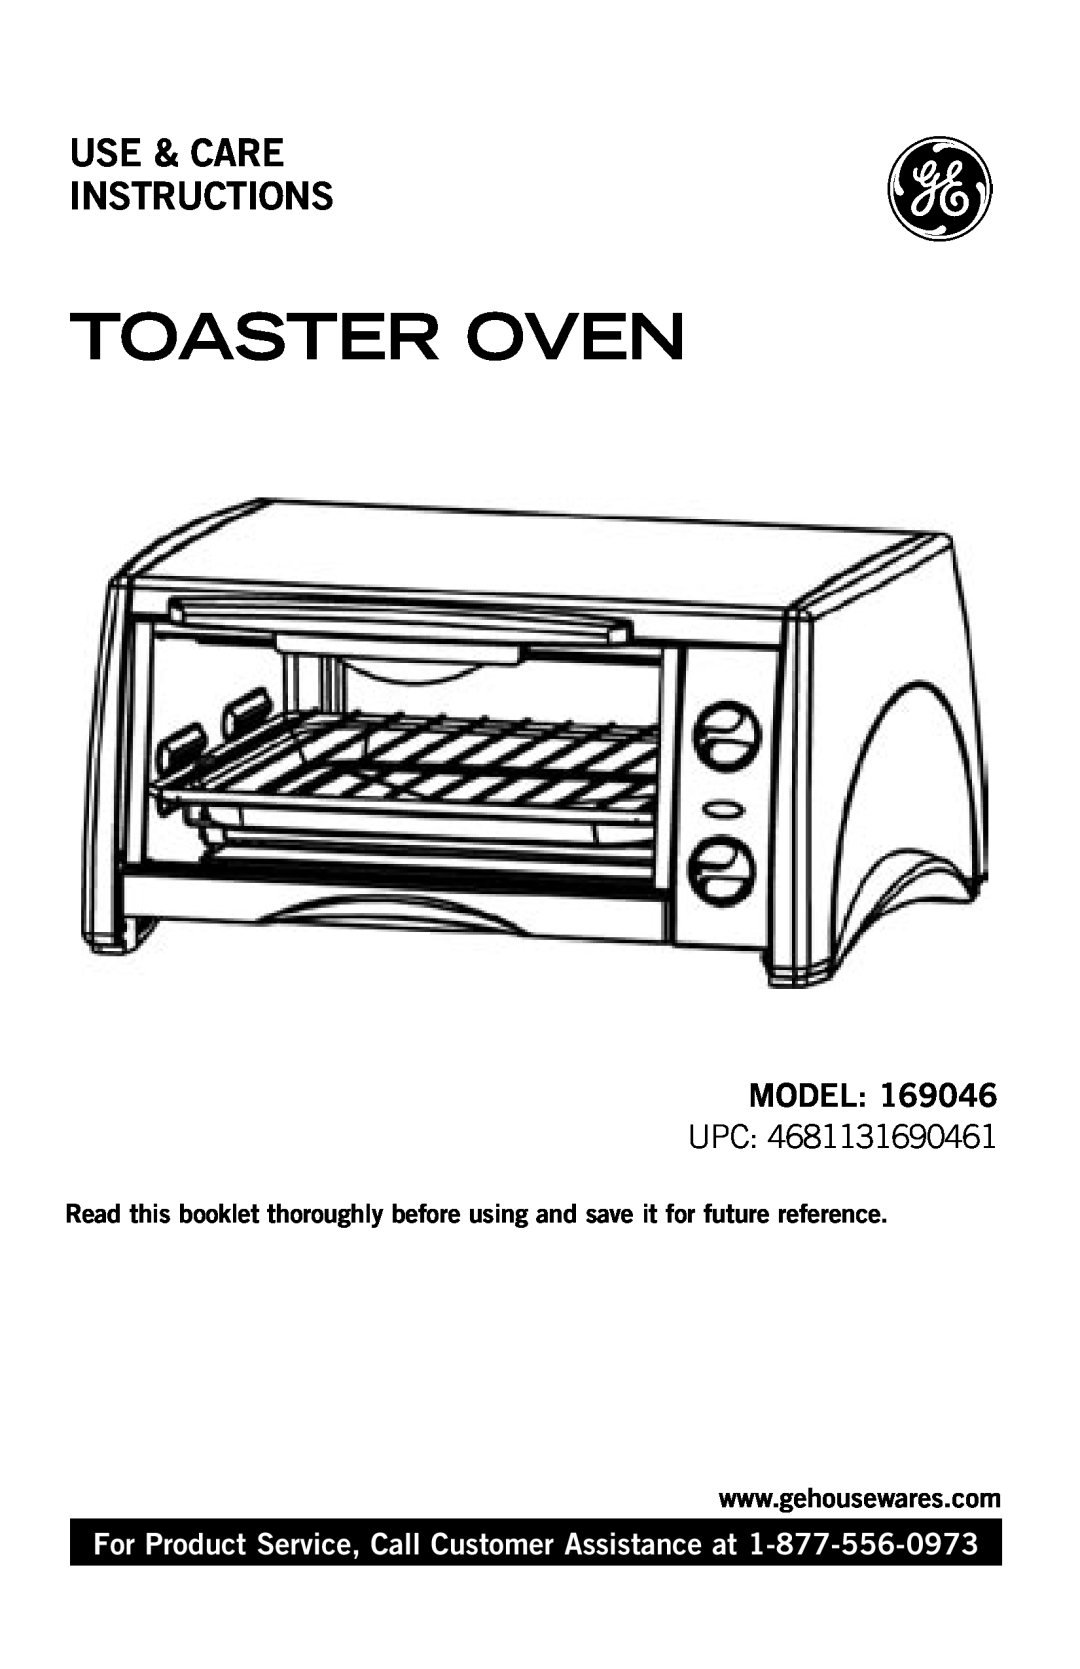 GE 4681131690461 manual Toaster Oven, Use & Care Instructions, Model, Upc, For Product Service, Call Customer Assistance at 